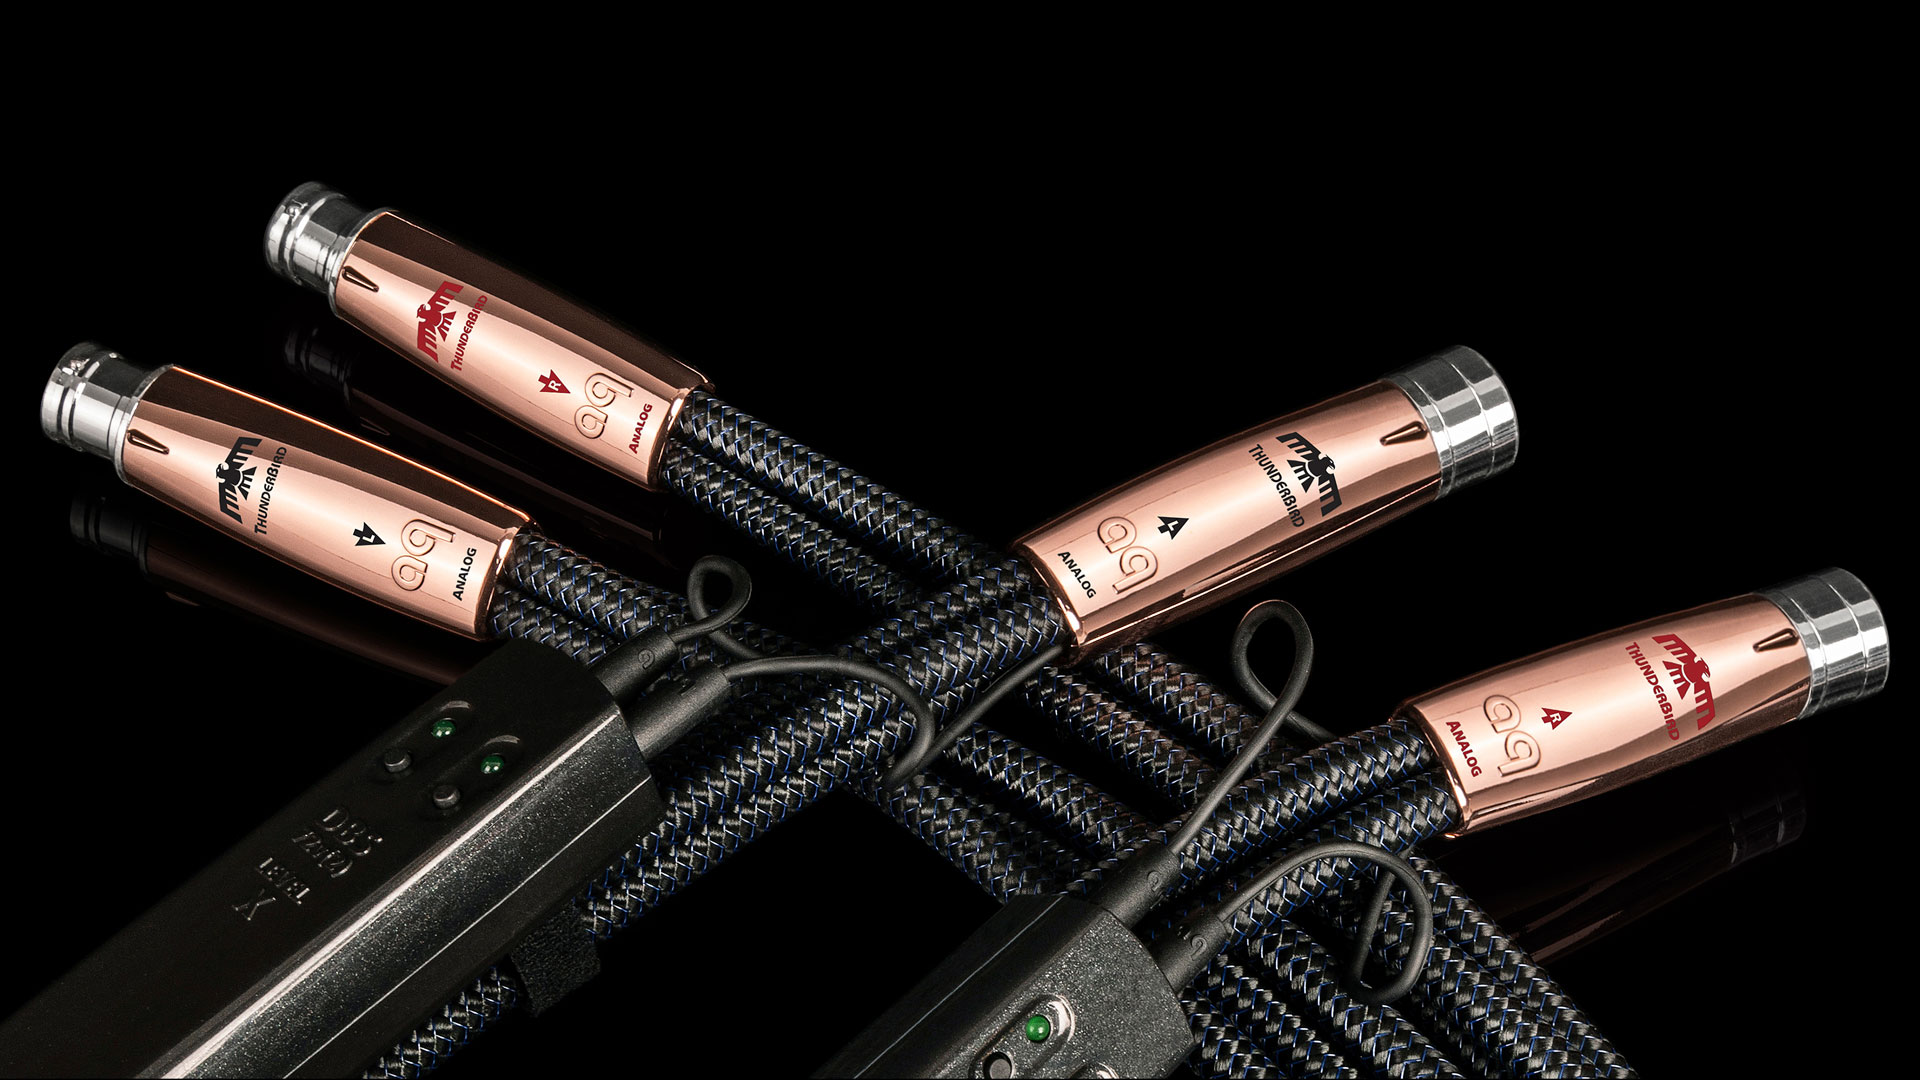 The new "Thunderbird" cables from Audioquest (Image Credit: Audioquest)